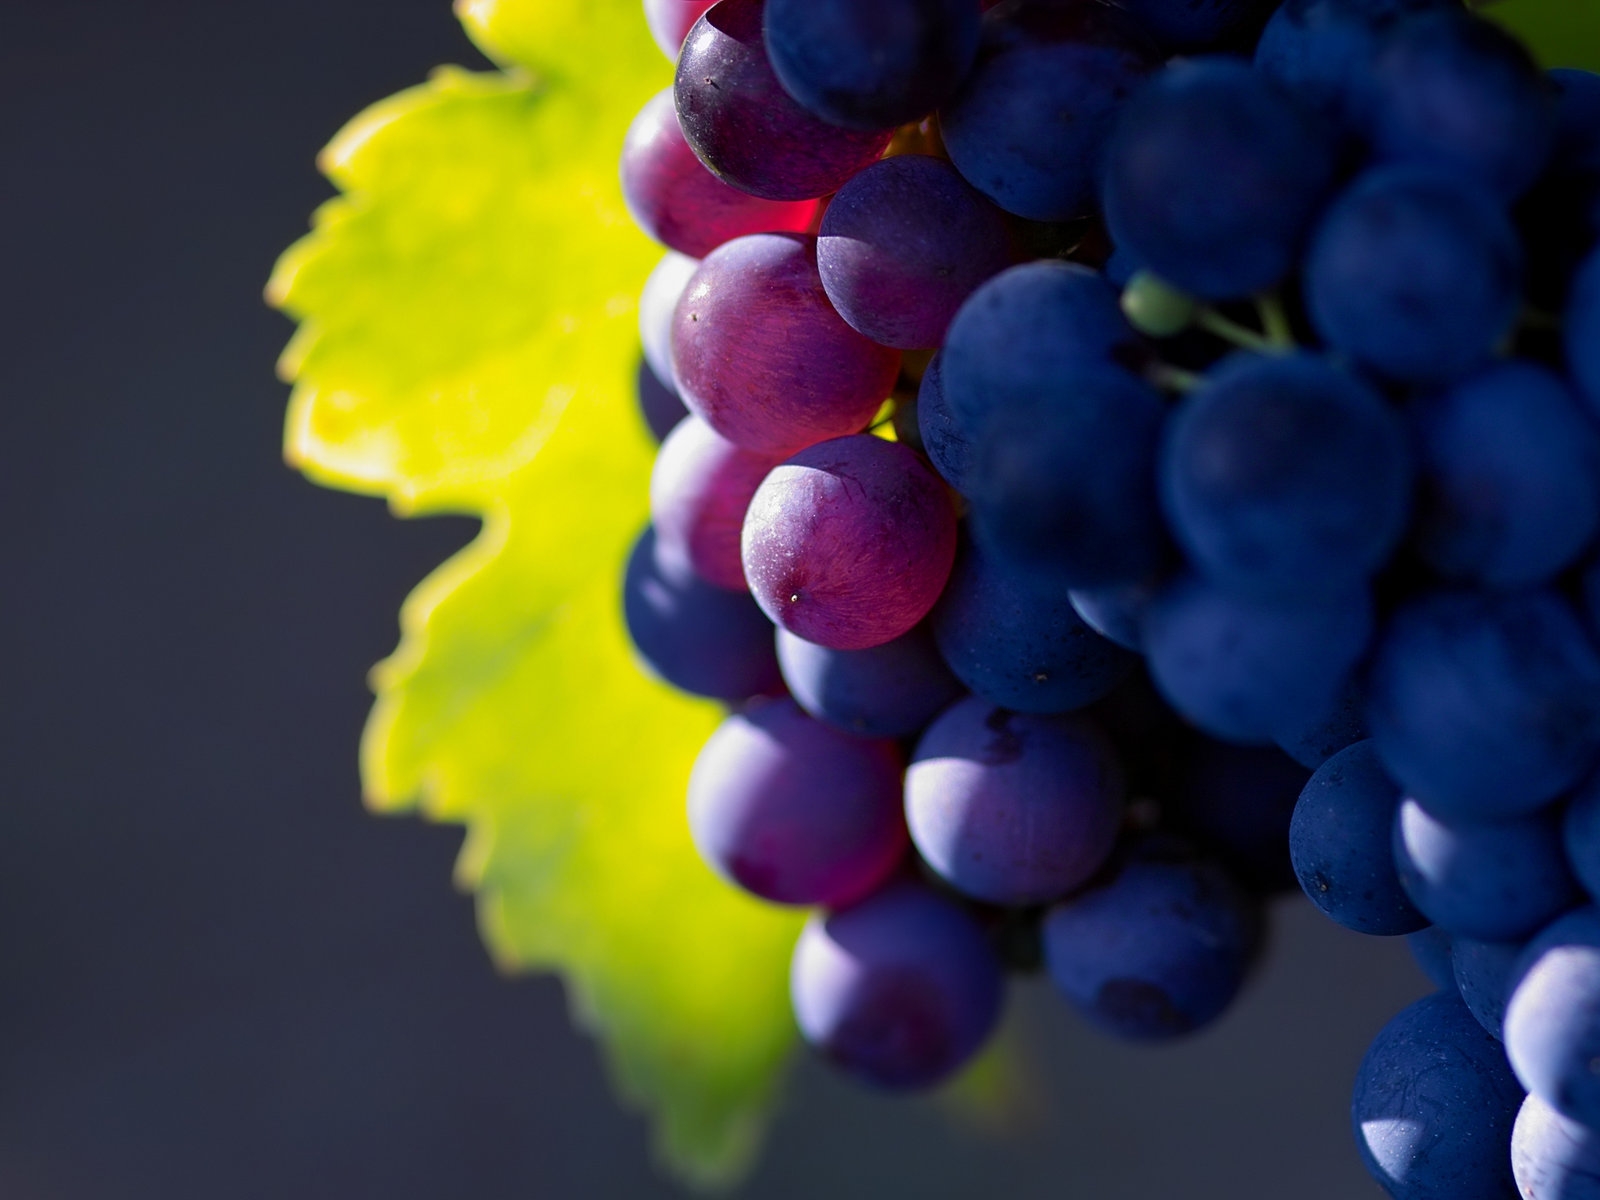 Bunch of Grapes for 1600 x 1200 resolution